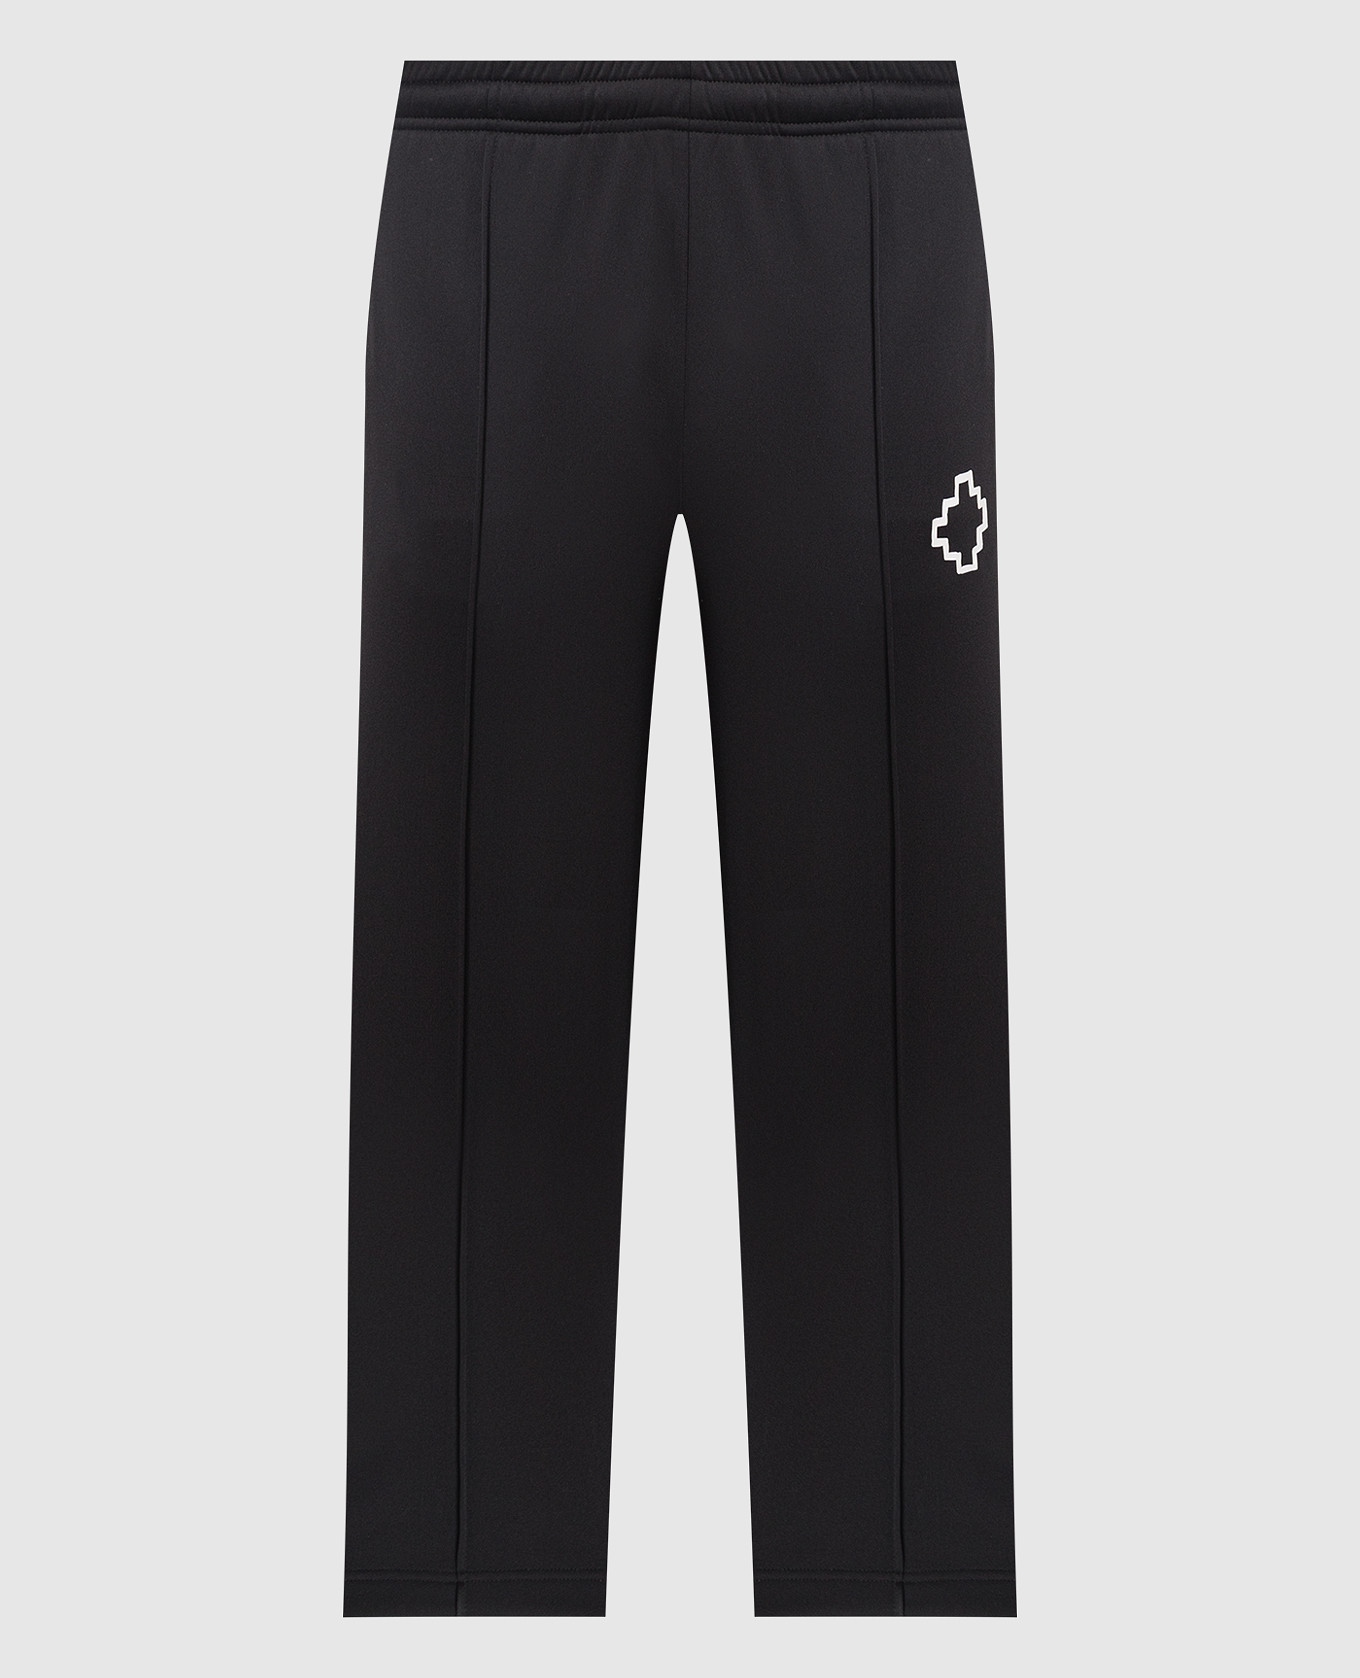 Black sports pants TEMPERA CROSS with contrasting logo